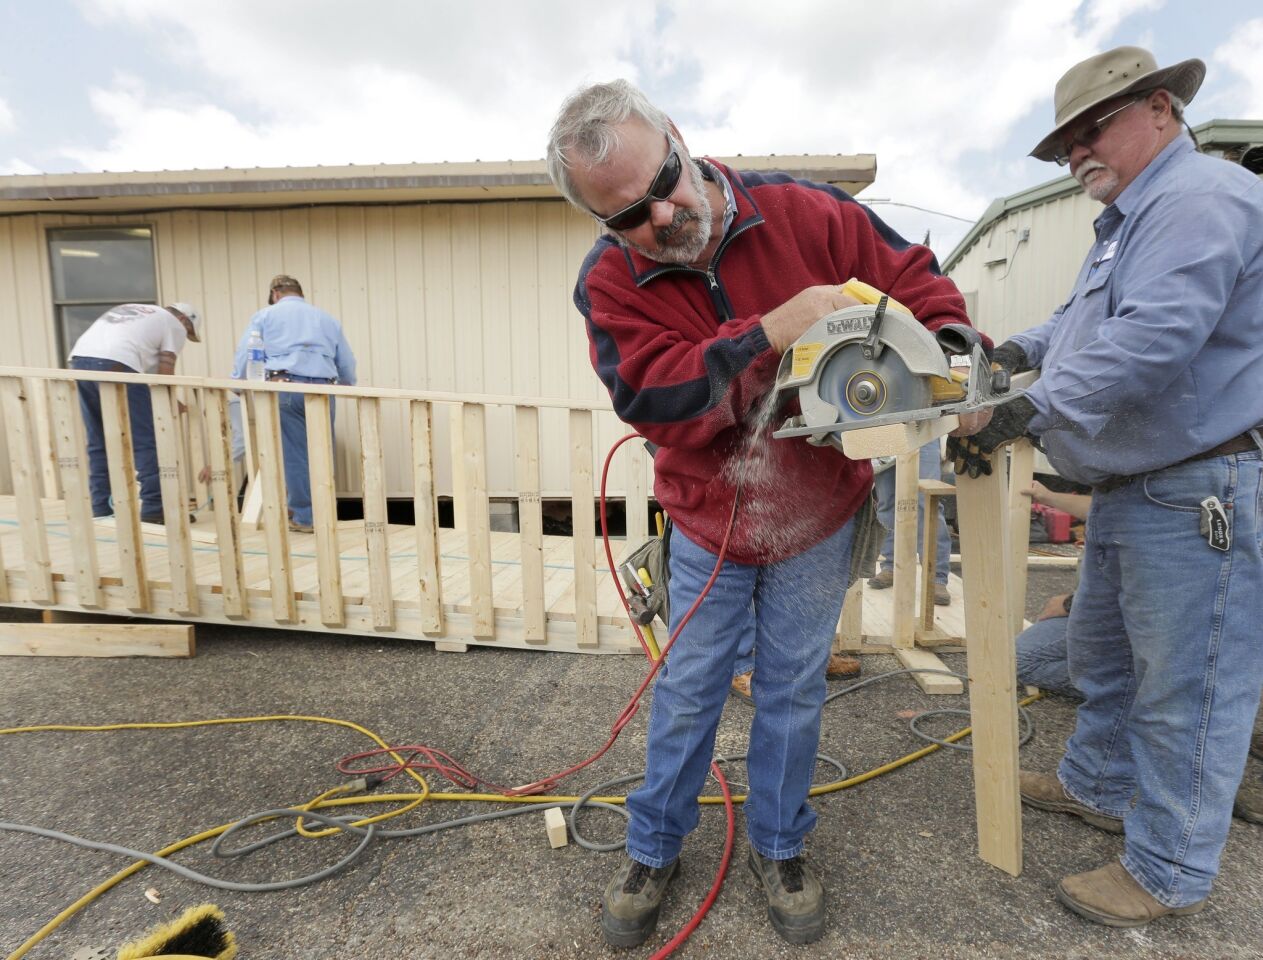 Volunteers Dub Harris and Virgil Thompson, right, both from Temple, Texas, cut lumber to build a ramp for a temporary classroom after an explosion at a fertilizer plant in West, Texas, damaged three of the district's schools.